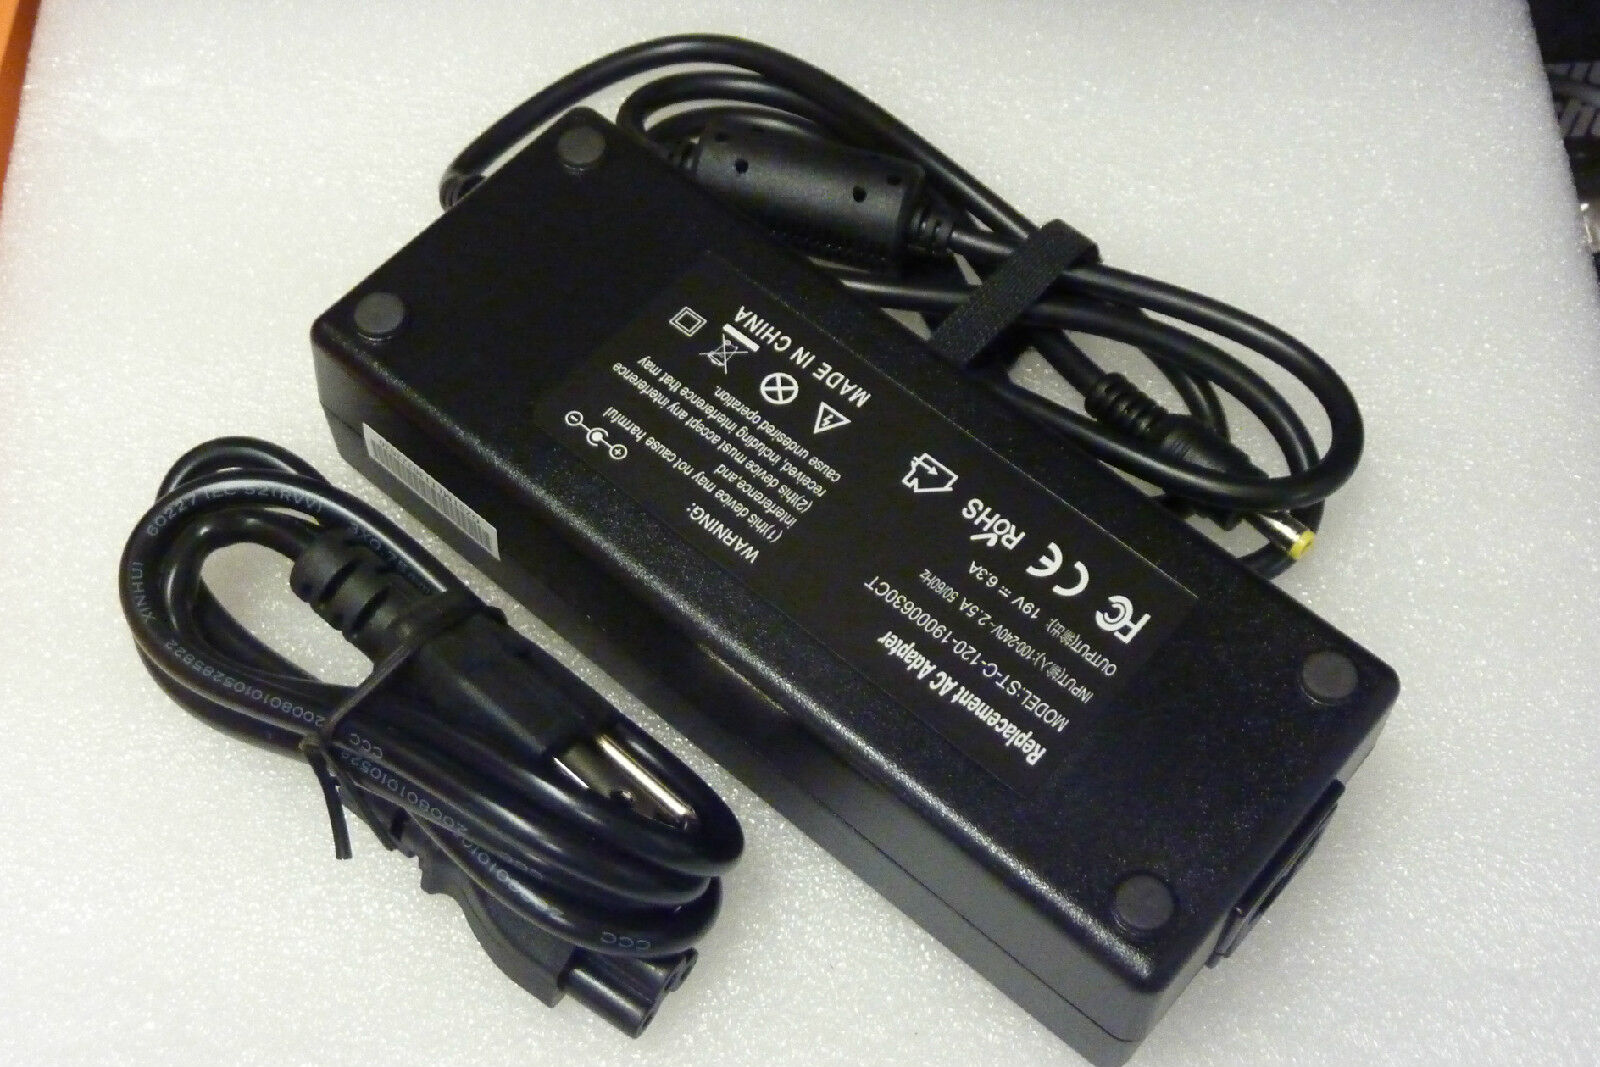 AC Adapter For ASUS K53SV-XR1 N53SV-XV1 N53SV-A1 Laptop 120W Charger Power Cord